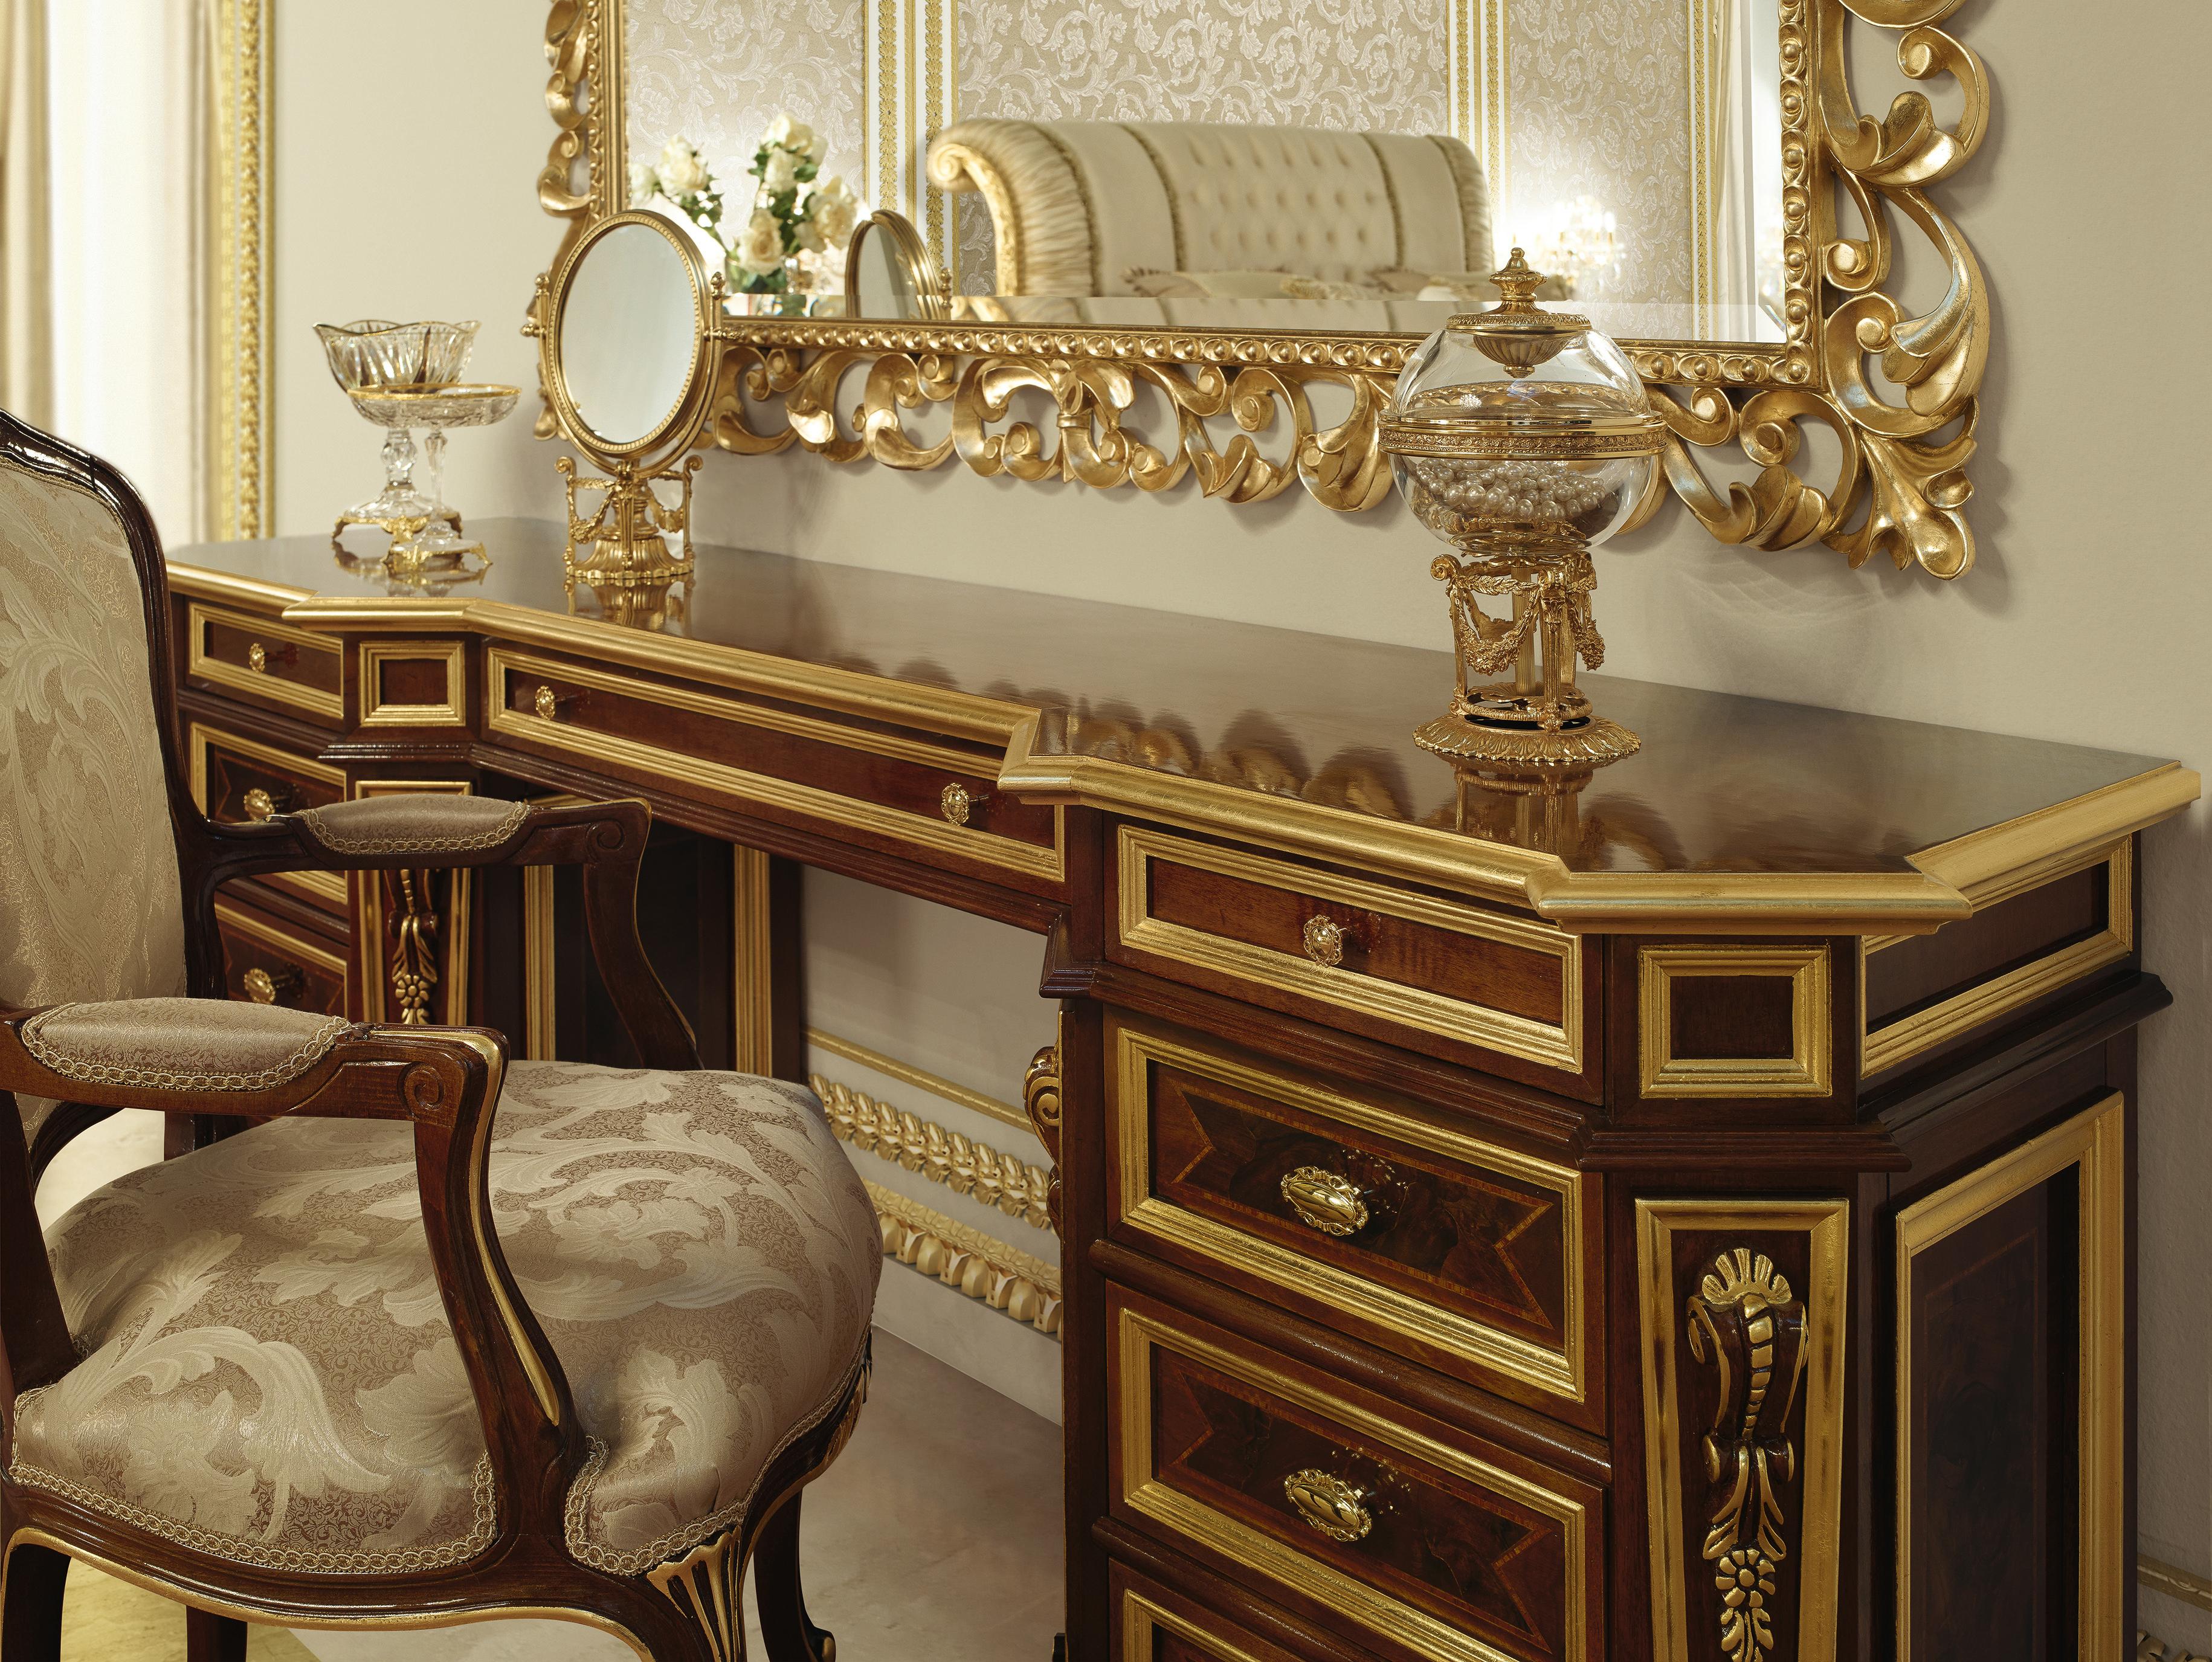 Made of solid wood with crafted details and a walnut lacquered finishing, this Modenese Luxury Interiors (Made in Italy) vanity unit adds an elegant and timeless feel to your room. Precious veneer on the drawers and side panels, added to hand